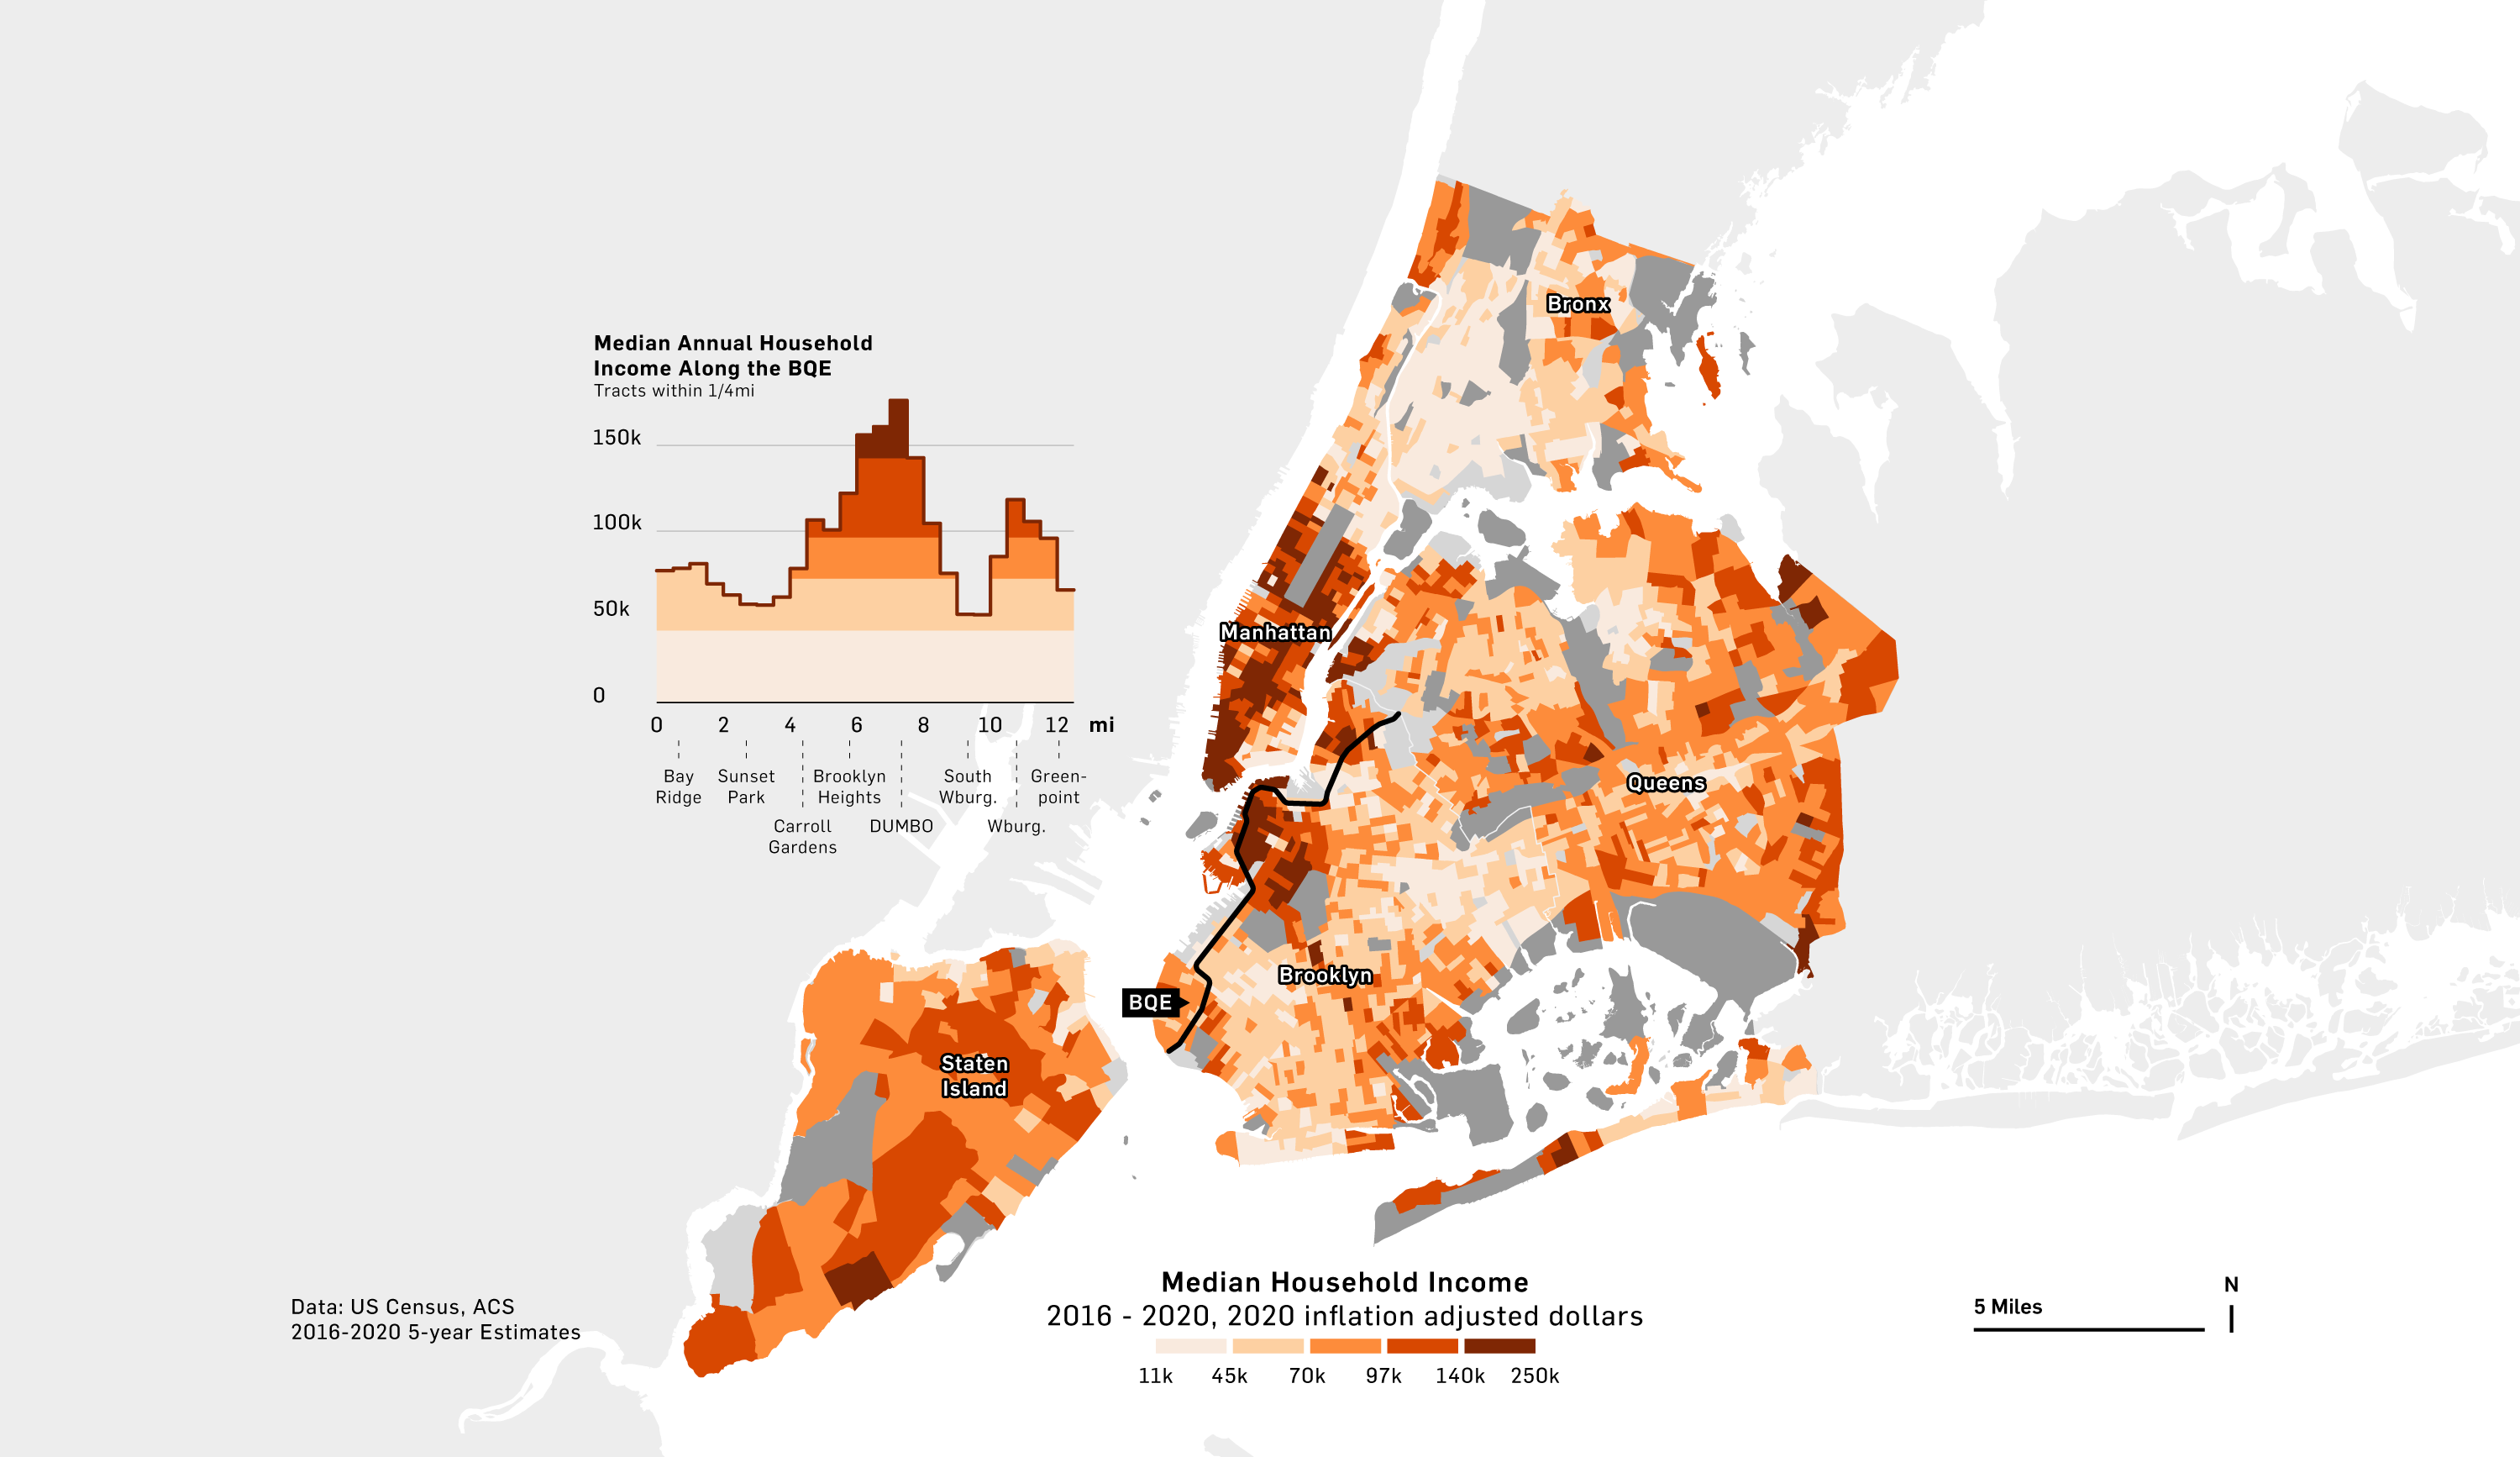 Median household income along the BQE in Brooklyn